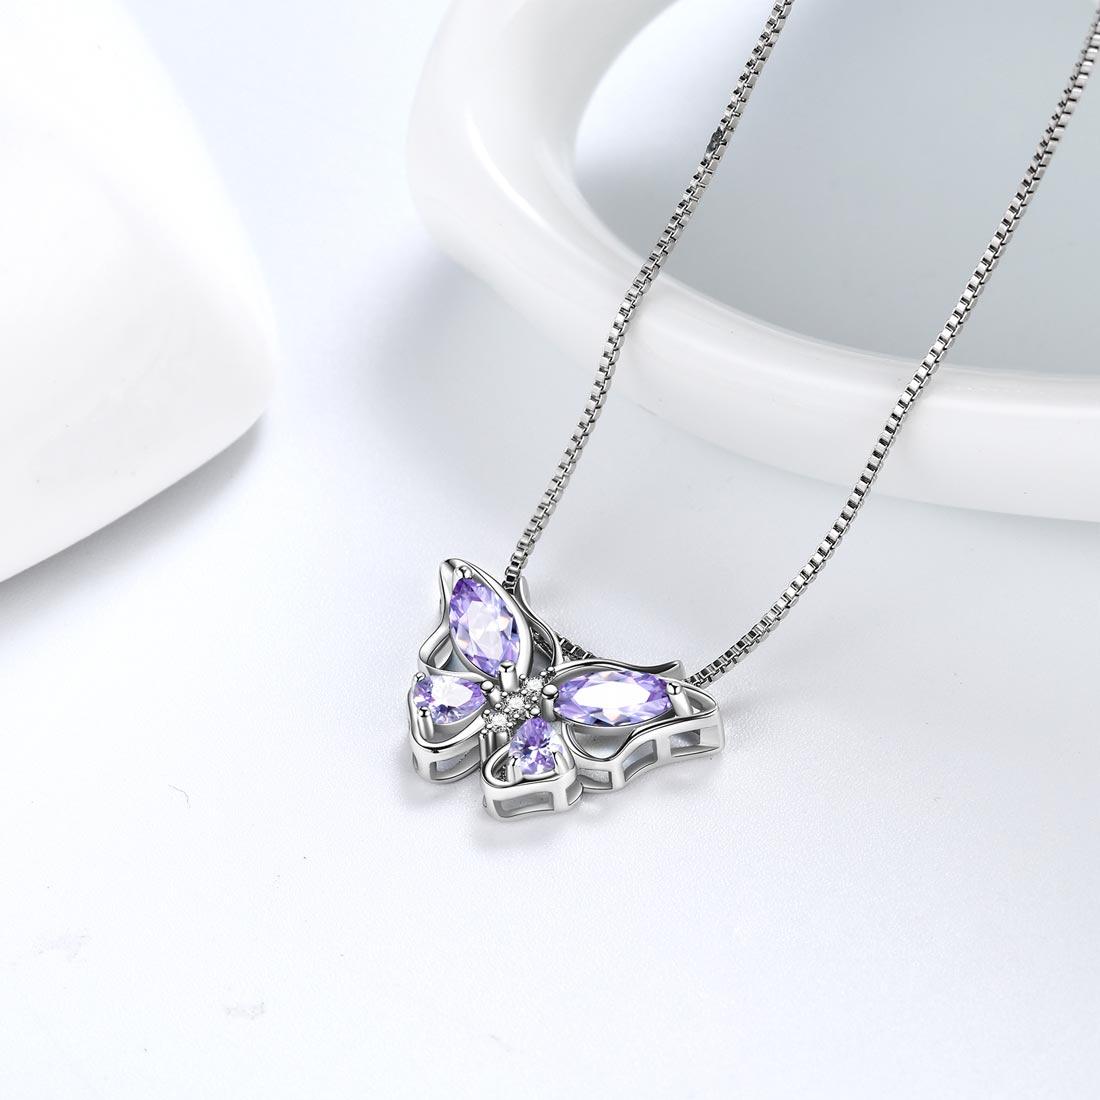 Butterfly Pendant Necklace Birthstone June Alexandrite - Necklaces - Aurora Tears